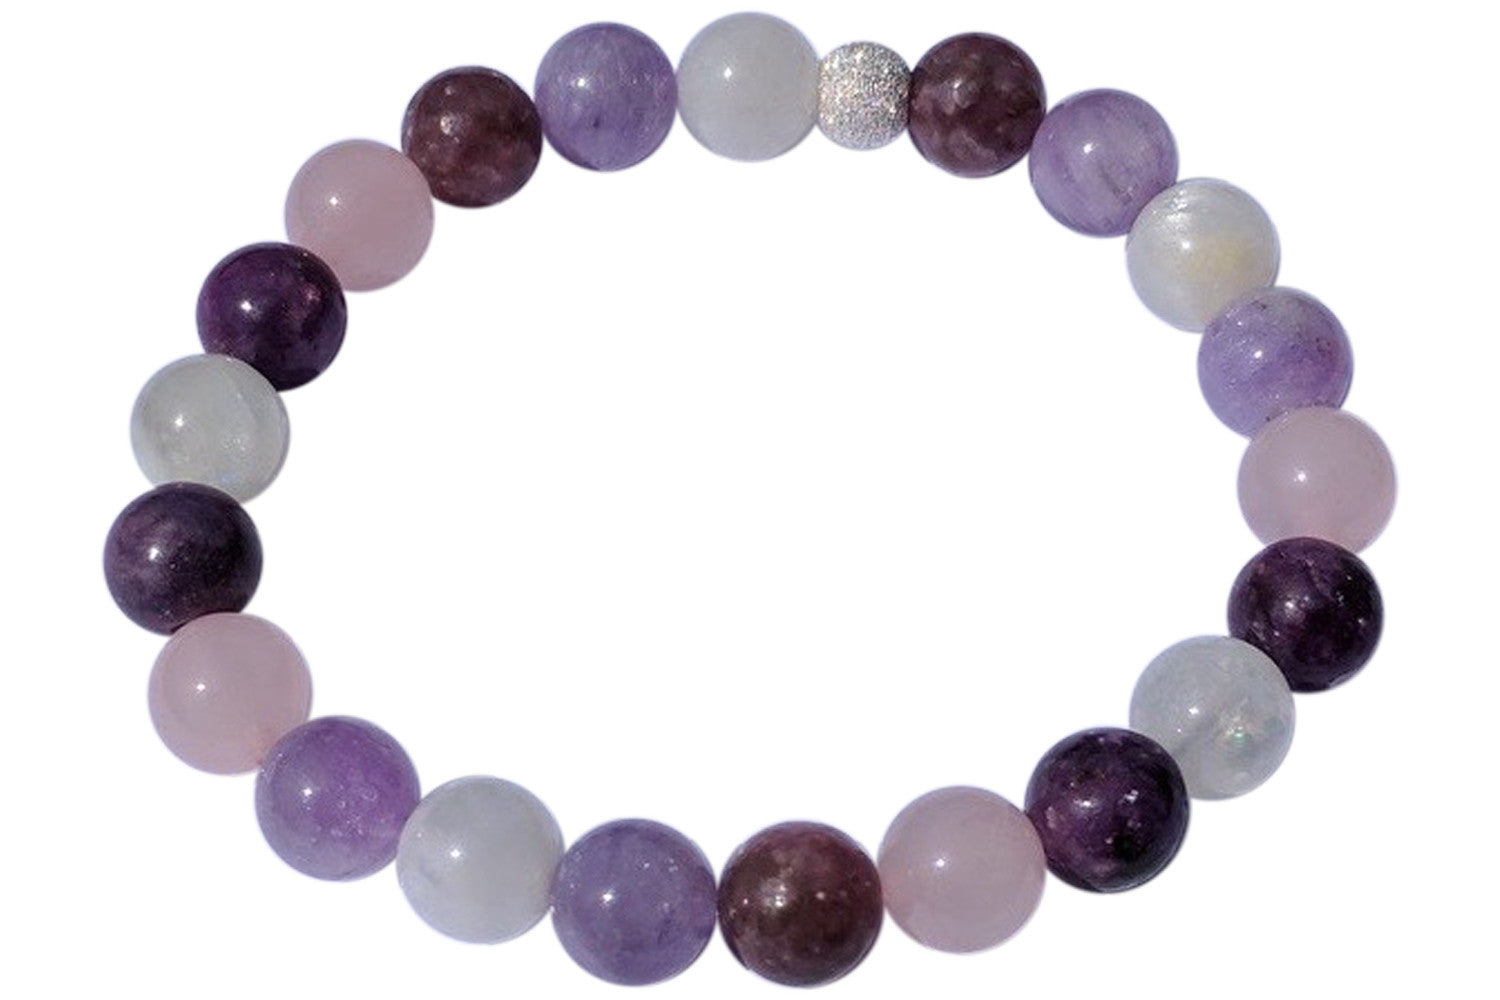 Goddess Bracelet | Ethical Crystals, Ascension Jewelry and Energy Tools ...